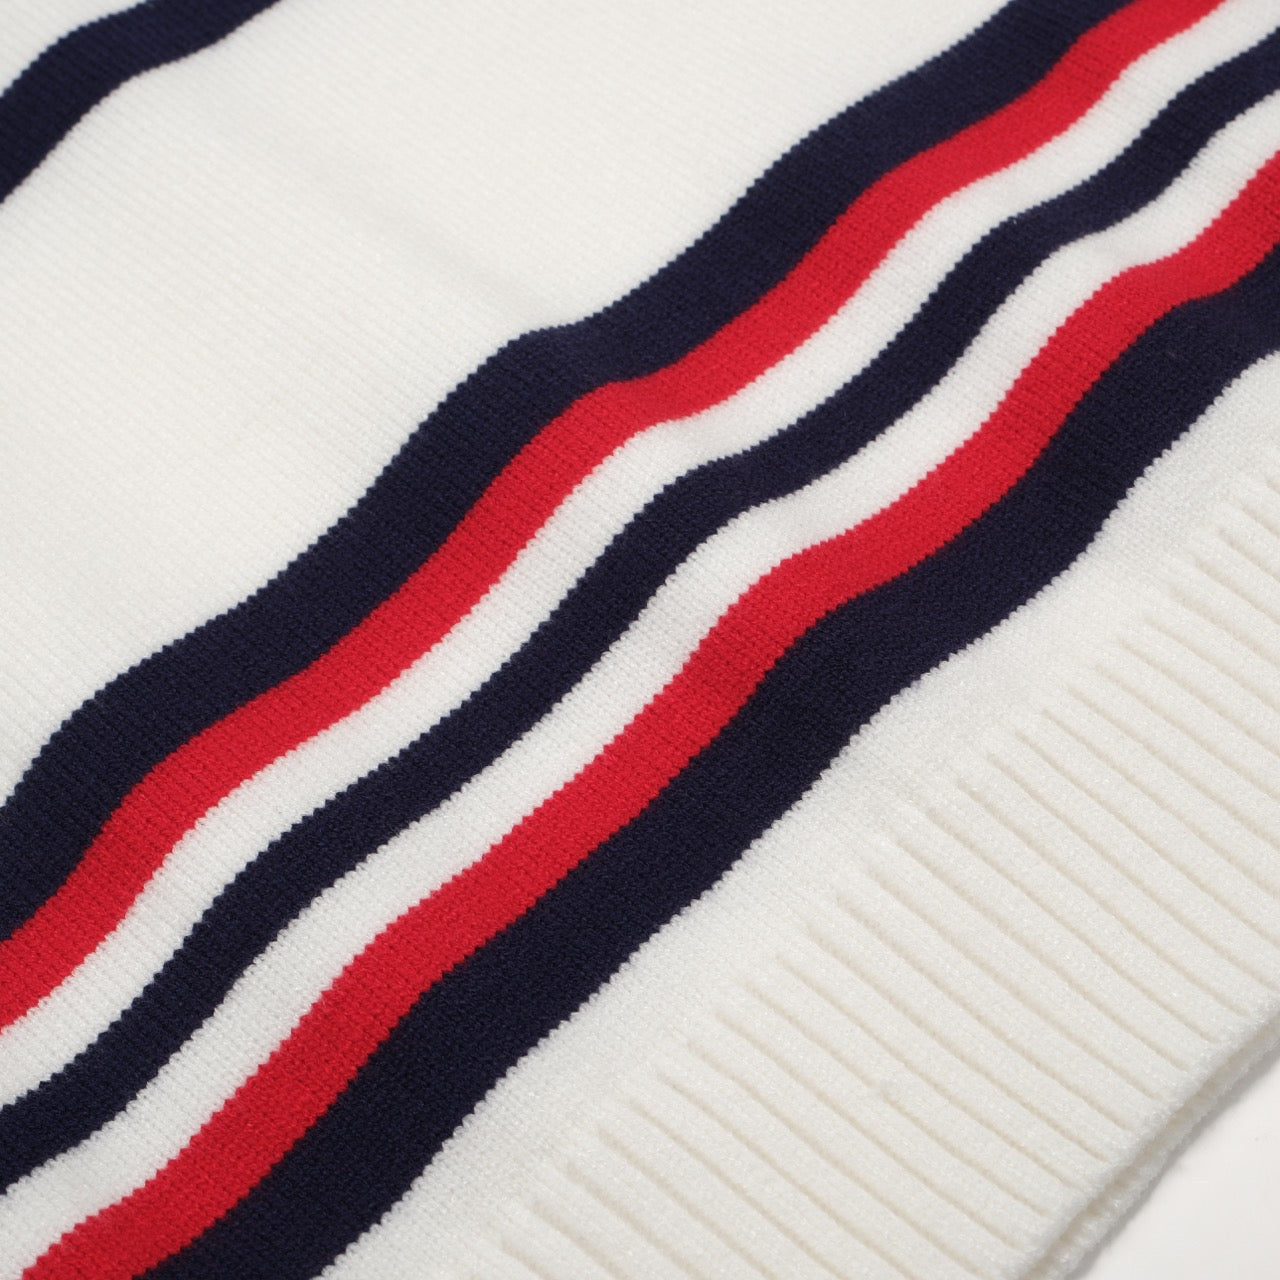 Men's White Retro Stripes Knitted Sweater with Red & Dark Blue Lines